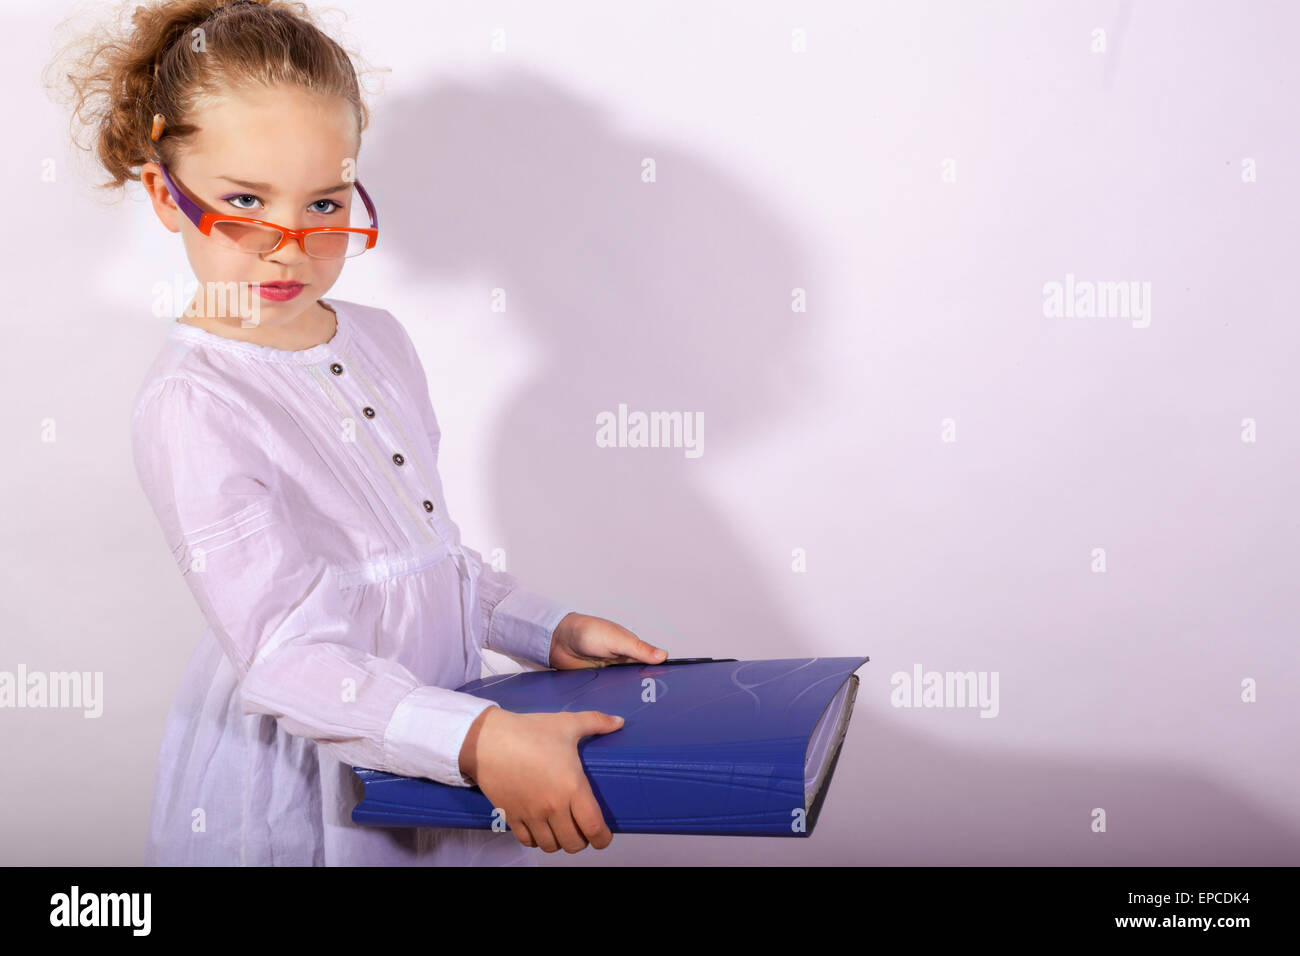 Basic school child with file in the hand and pencil behind the ear Stock Photo